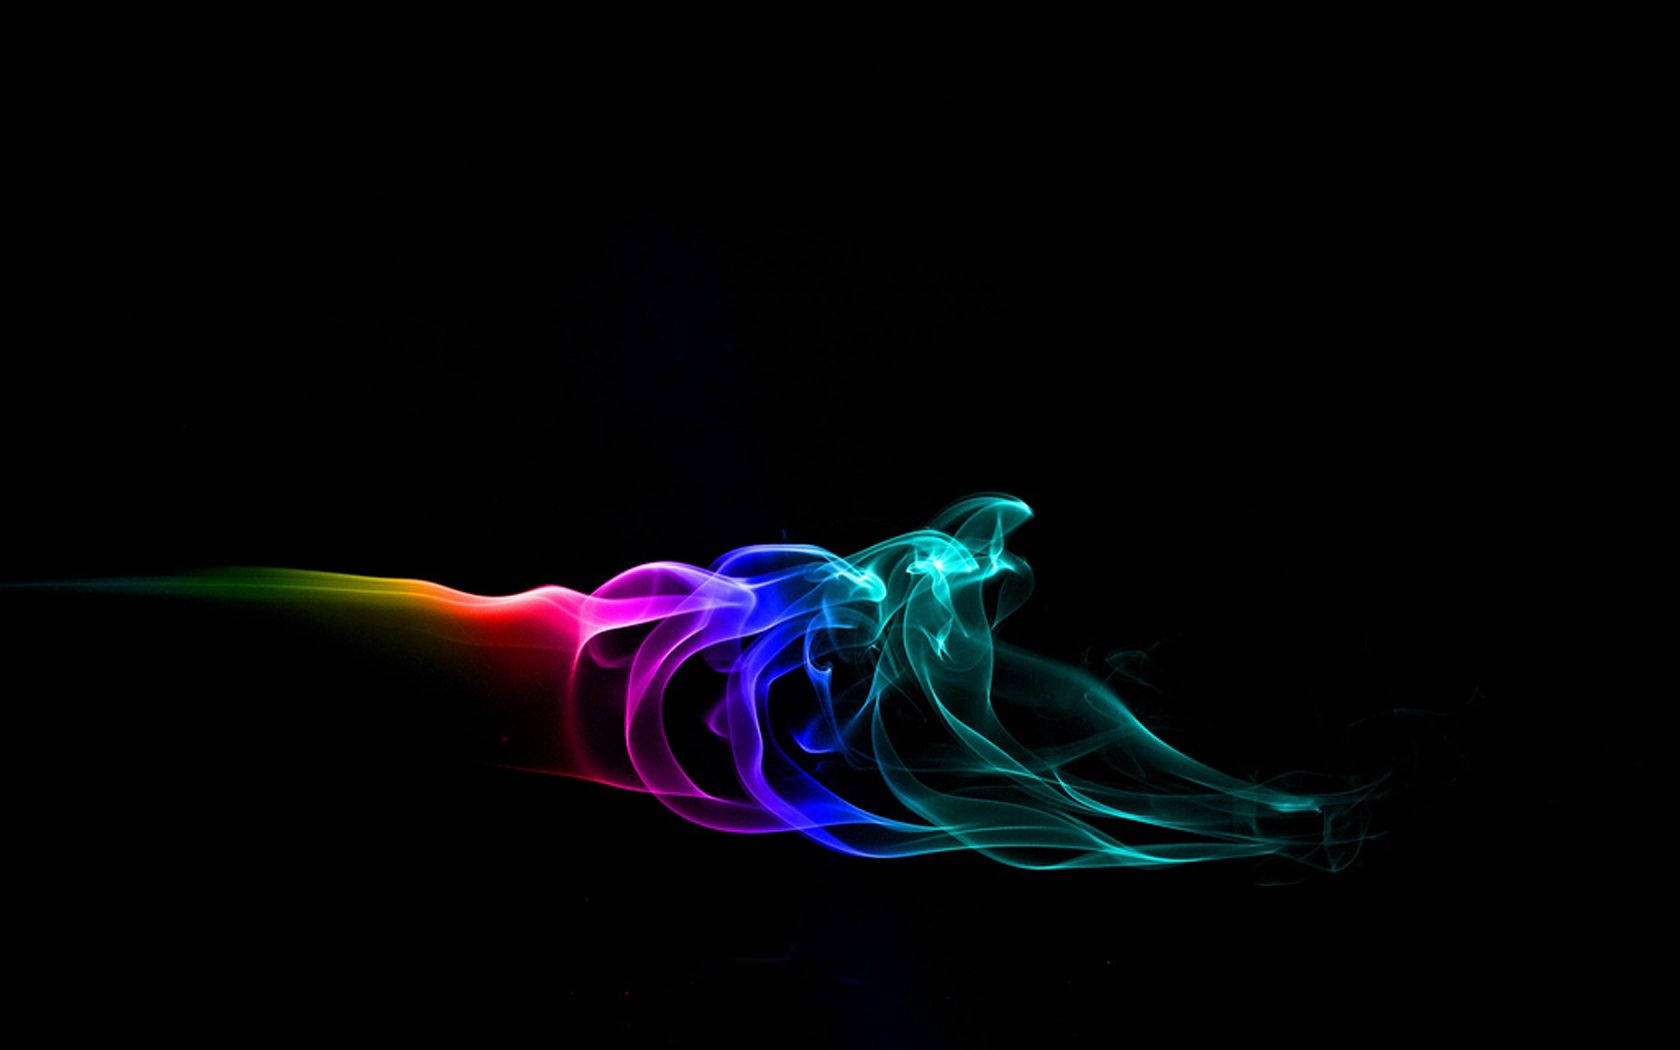 Colored Abstract Smoke Pattern Background